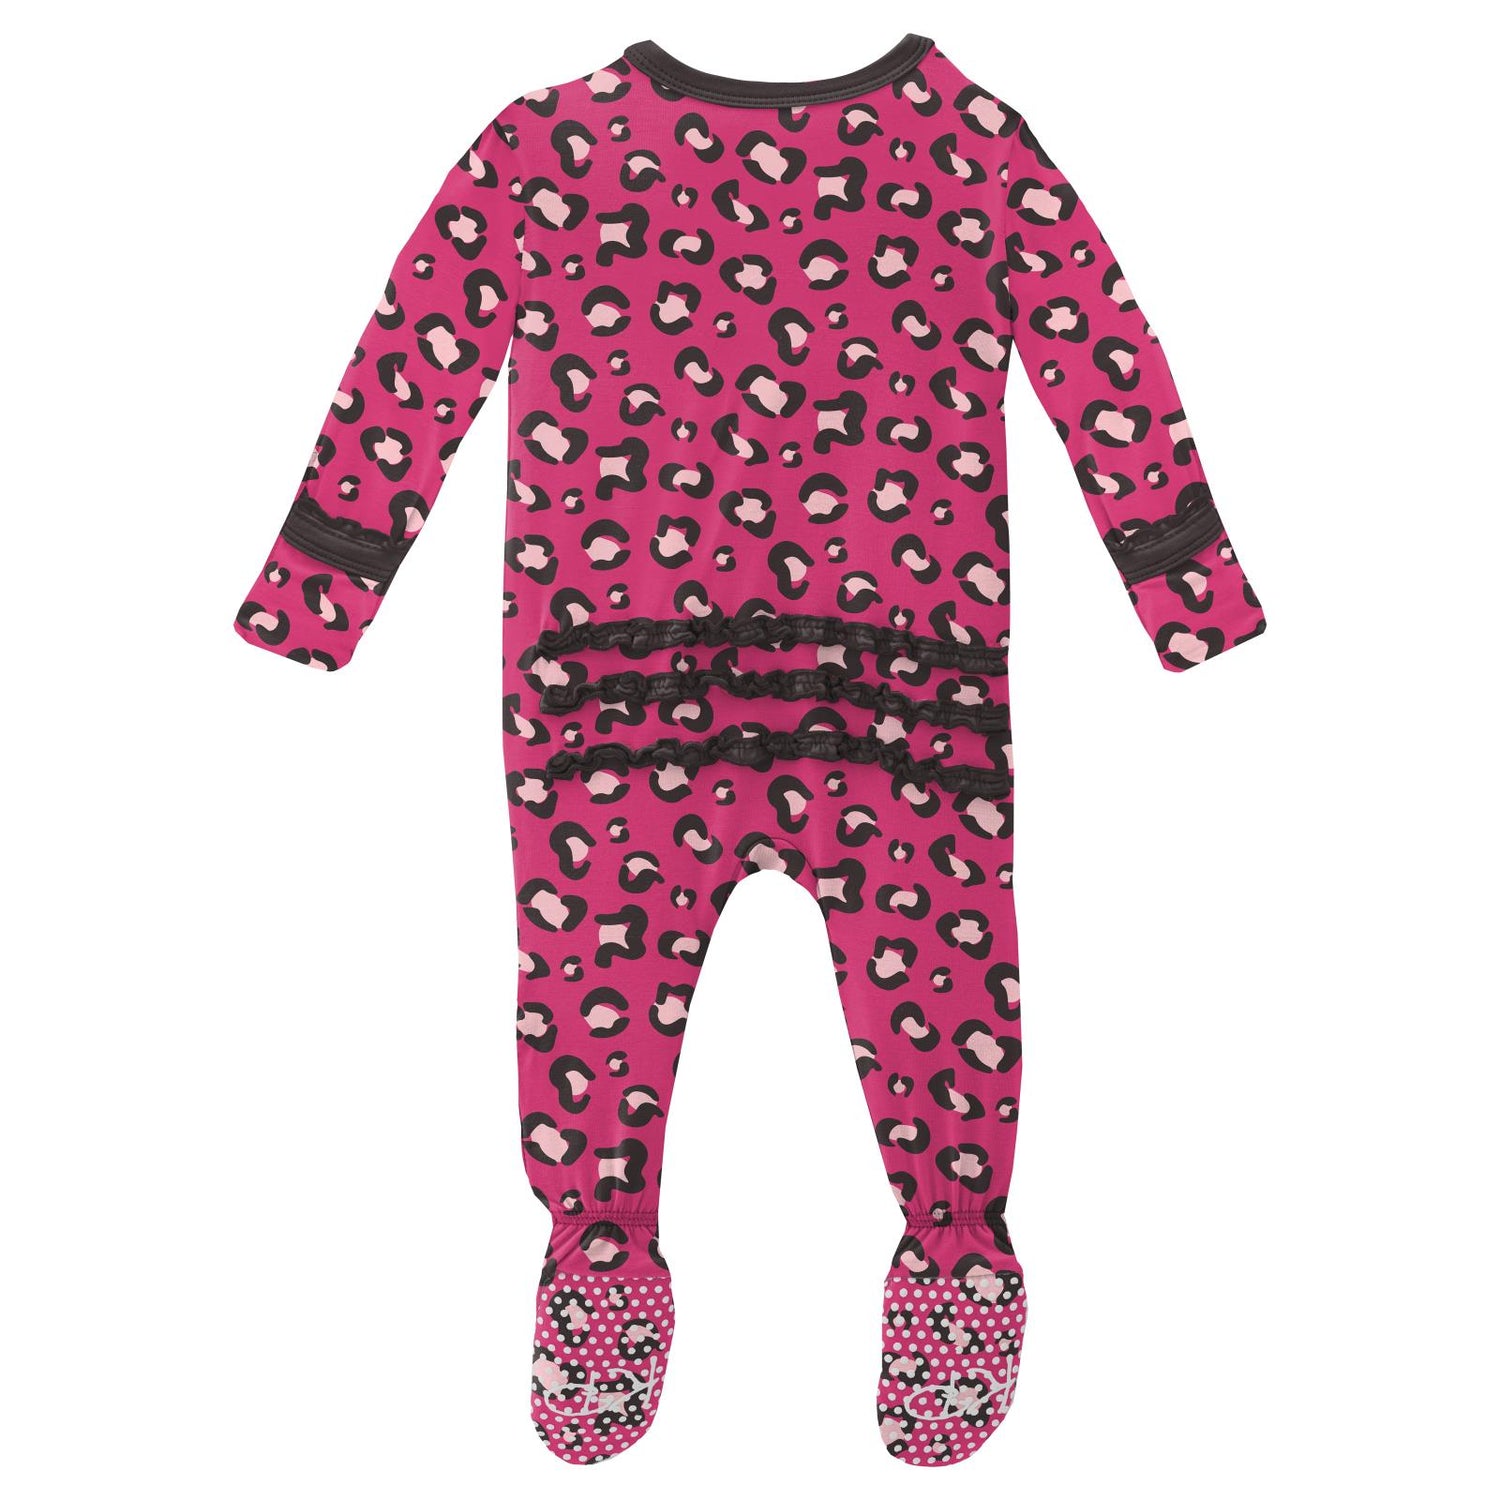 Print Muffin Ruffle Footie with Snaps in Calypso Cheetah Print